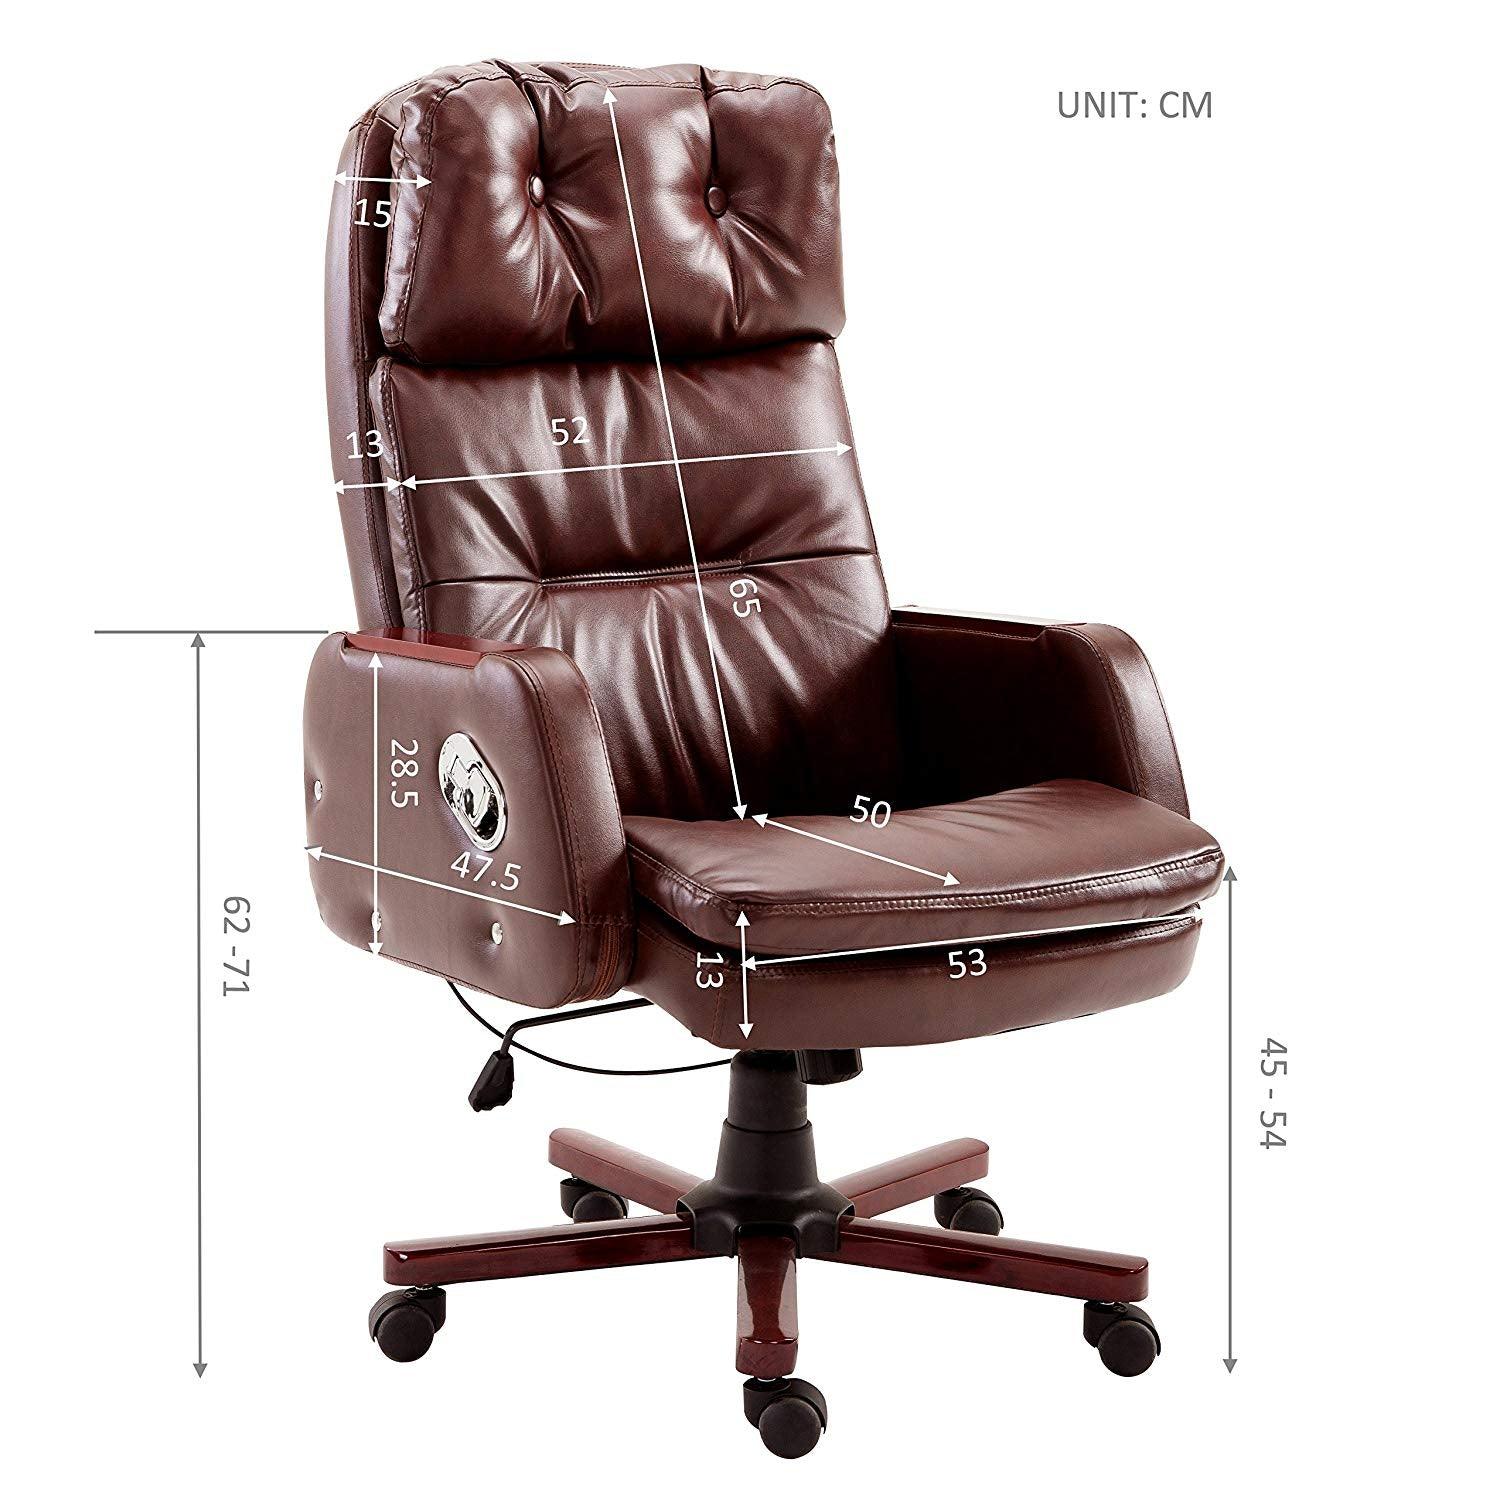 Luxury PU Leather Executive Swivel Recliner Office Chair, Brown – DaAl's